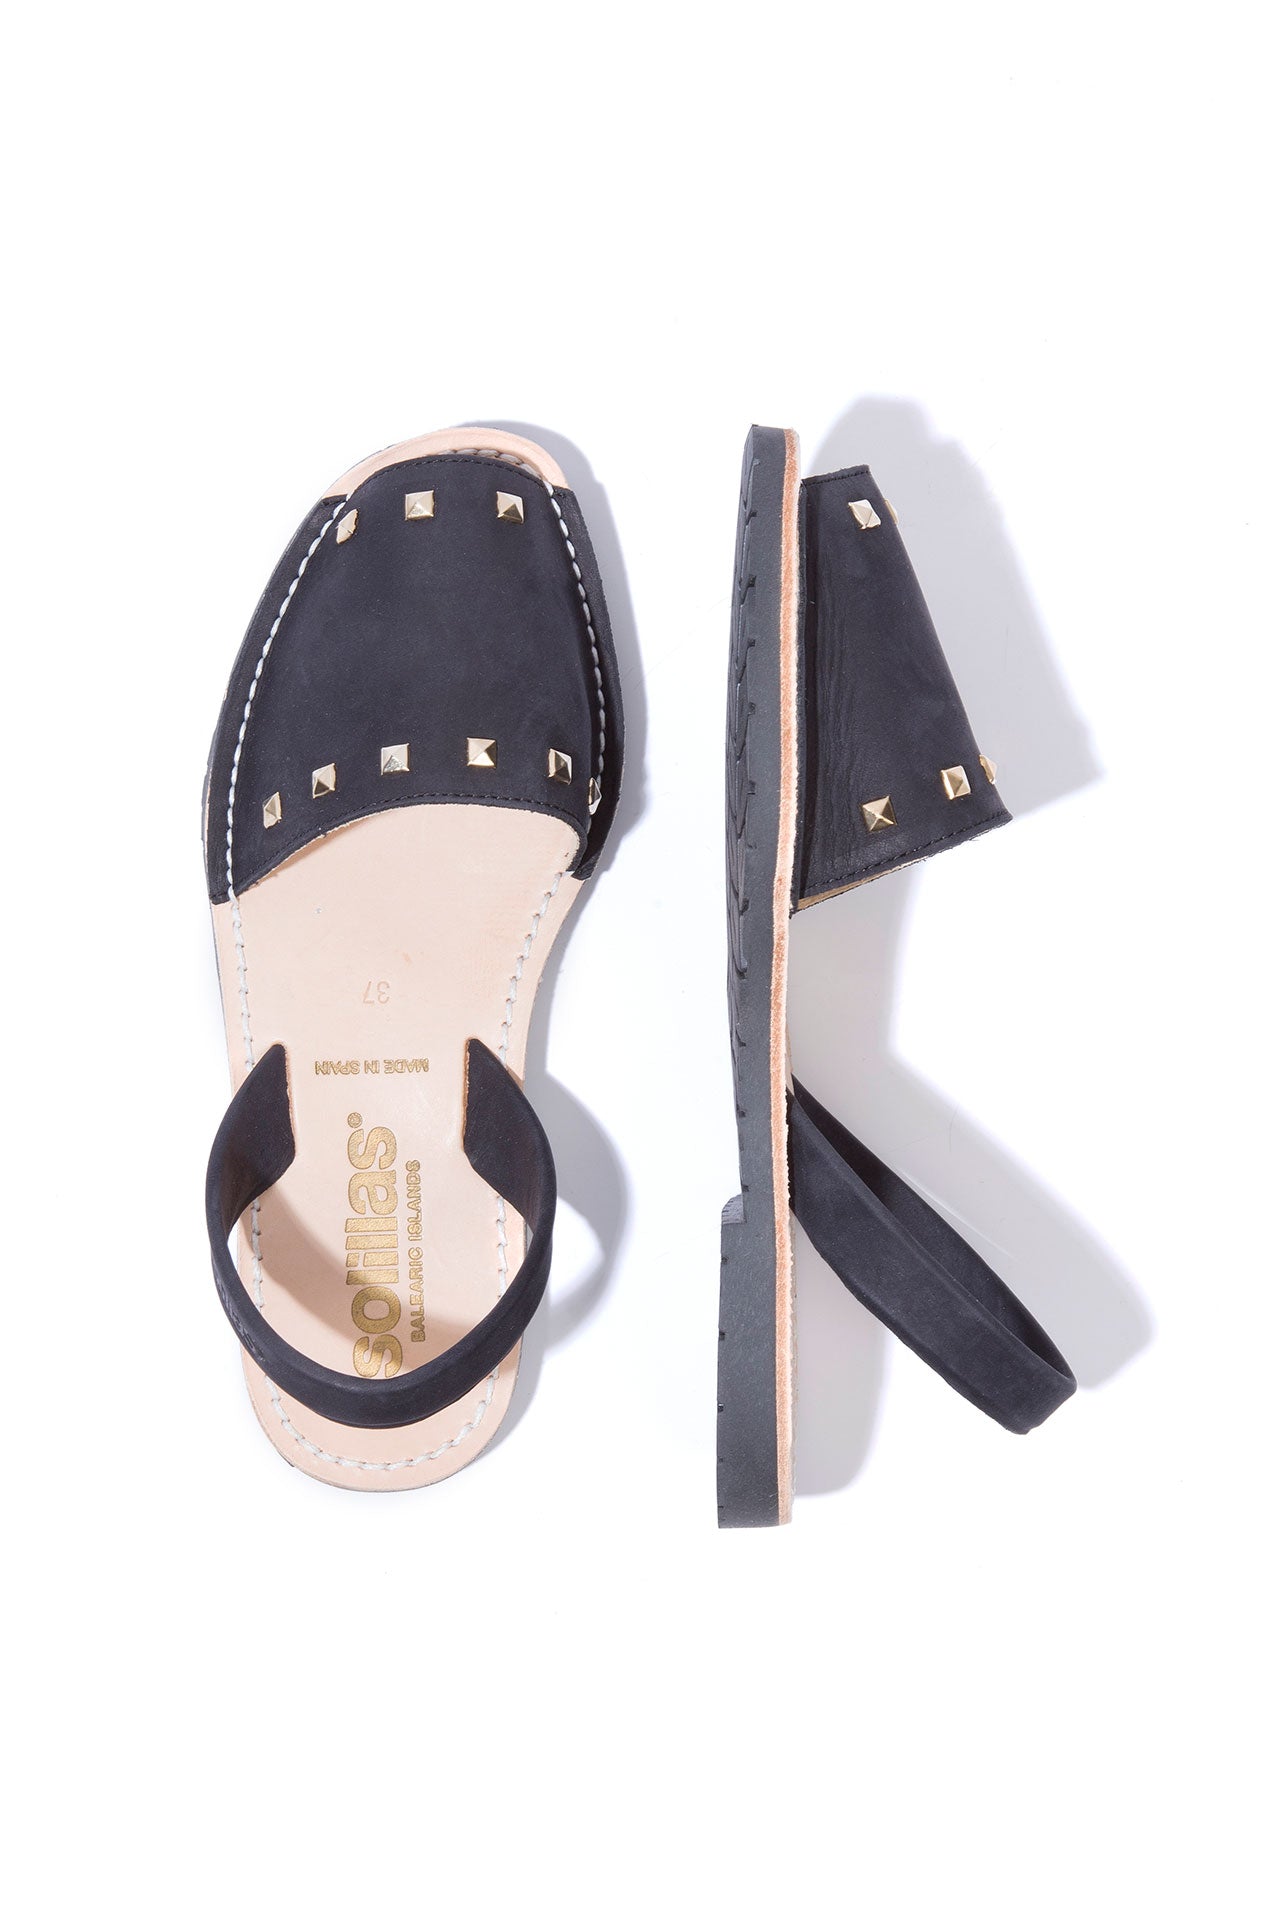 Noche Clavo - Studded Leather Menorcan sandals